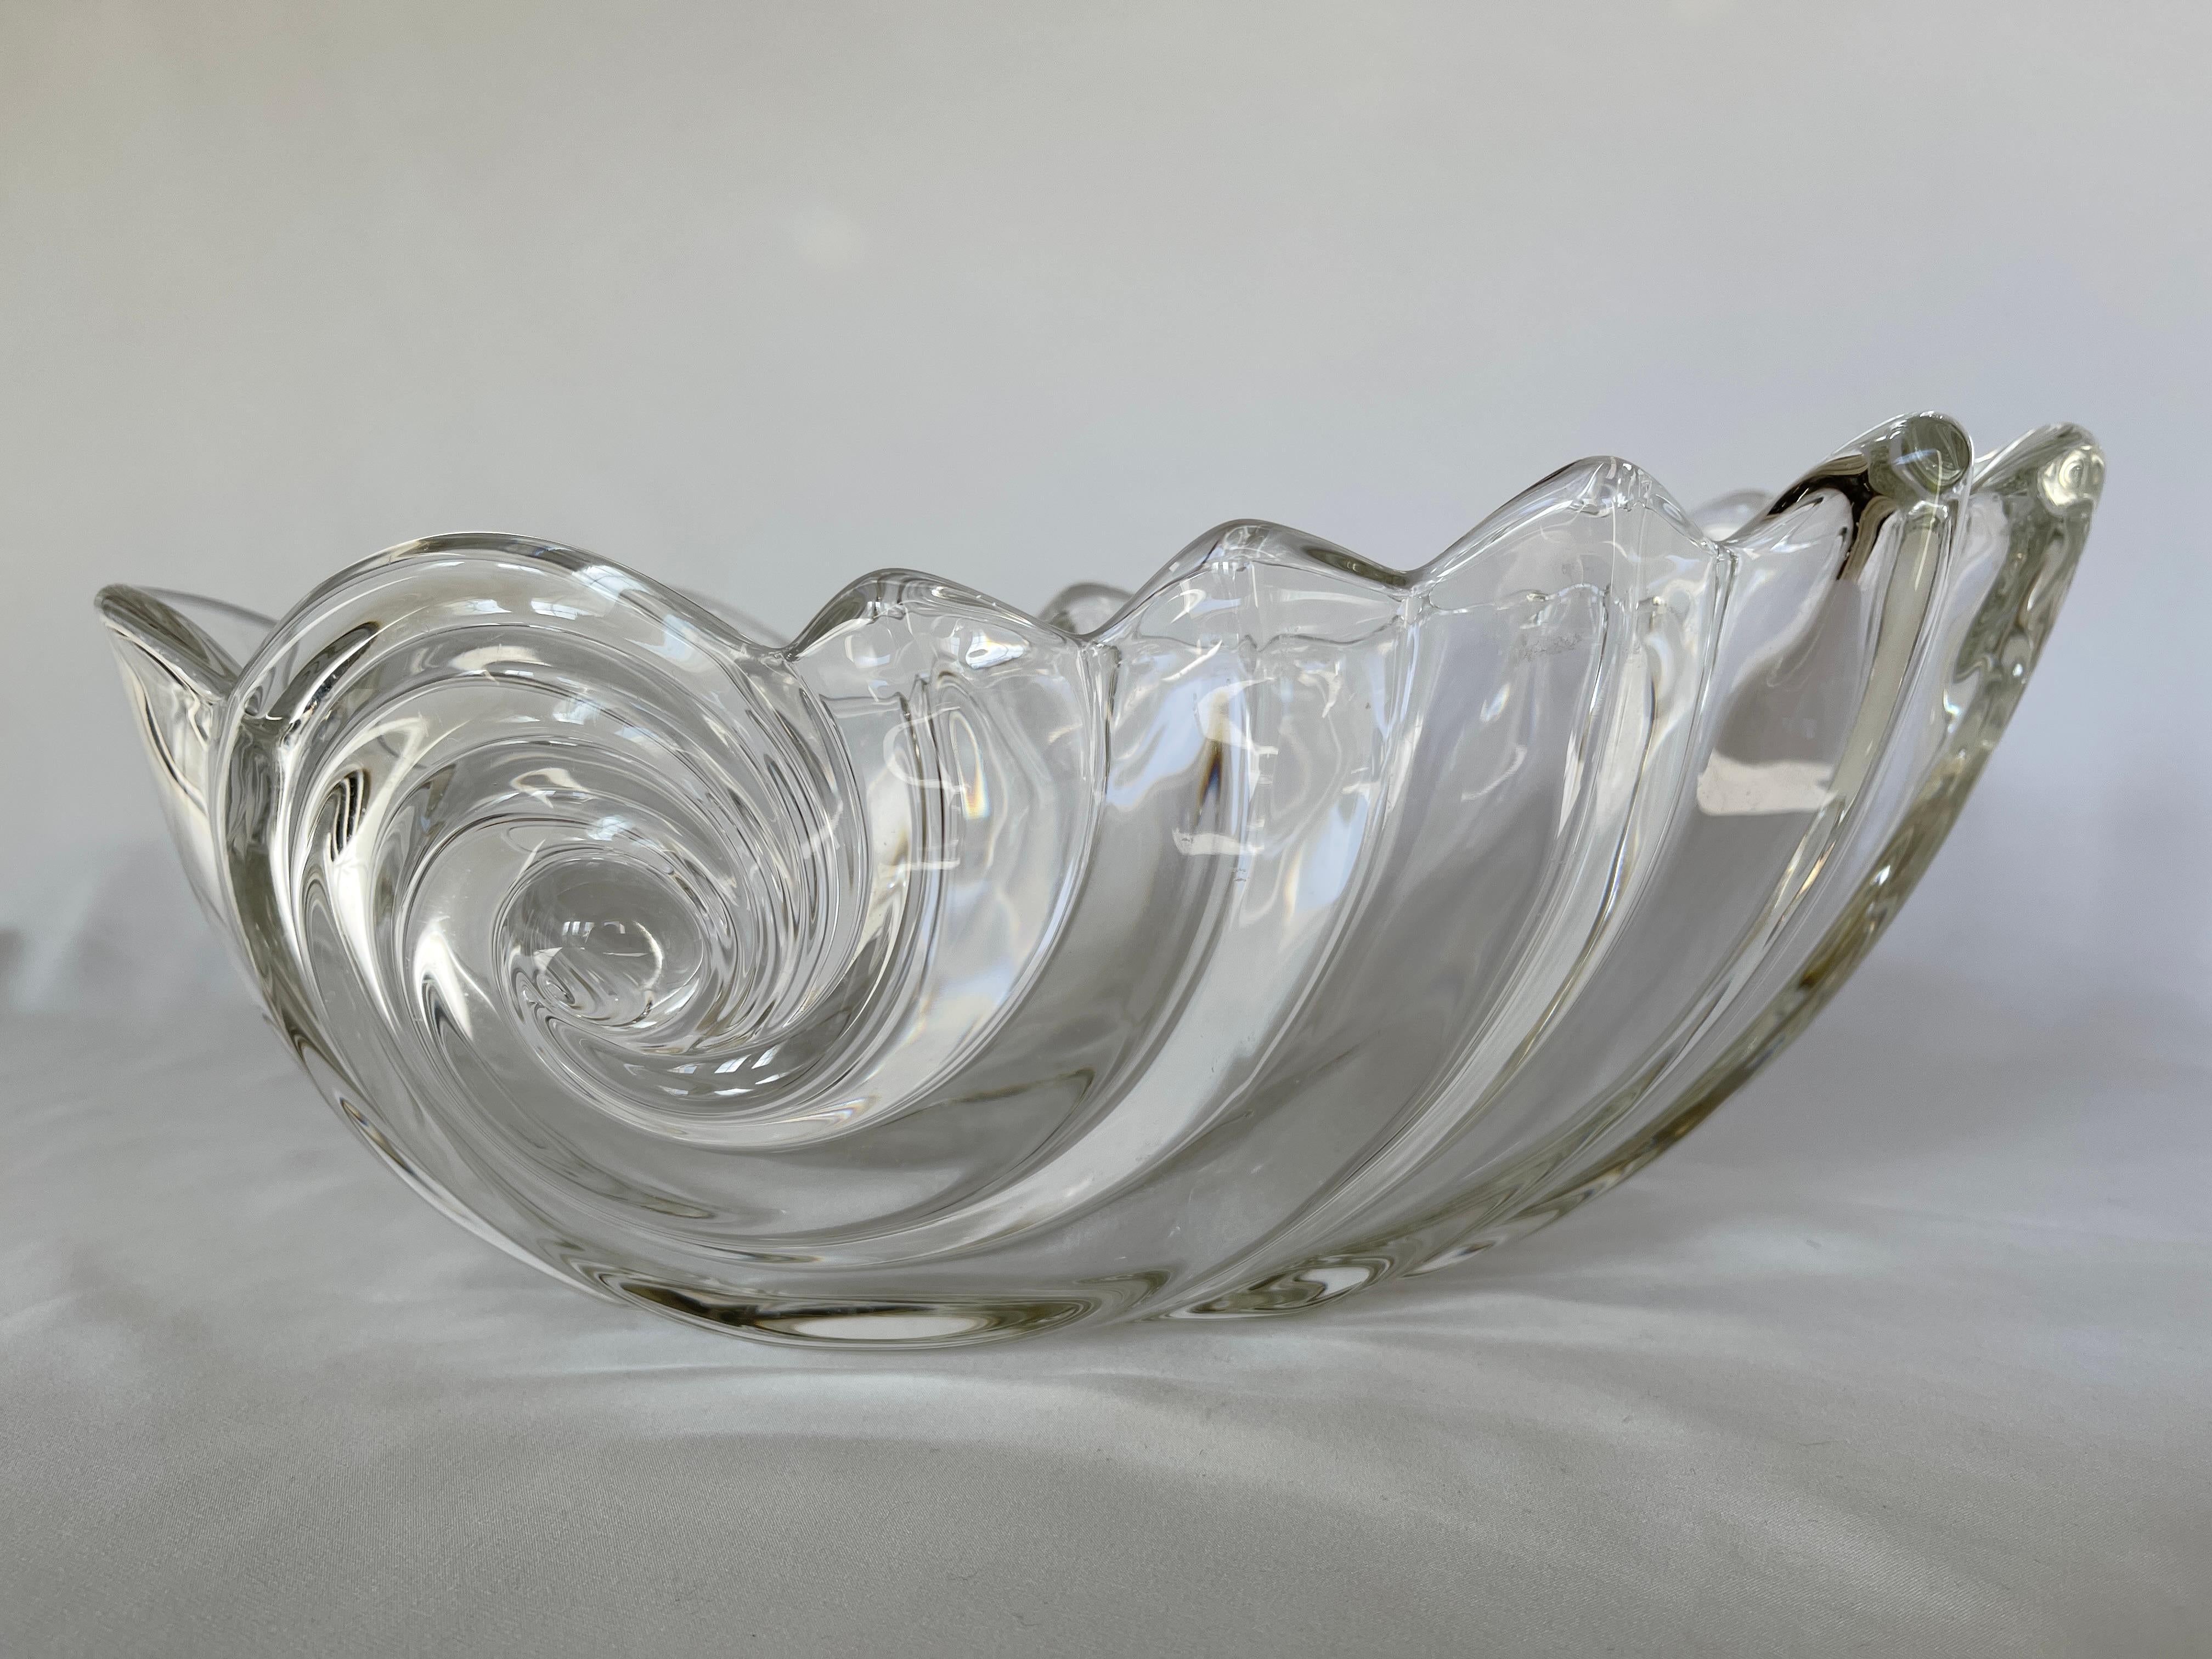 German lead crystal nautilus shell centrepiece serving bowl. 
Spectacular table presentation  for dining or console table, entry hall. 
Measures 14